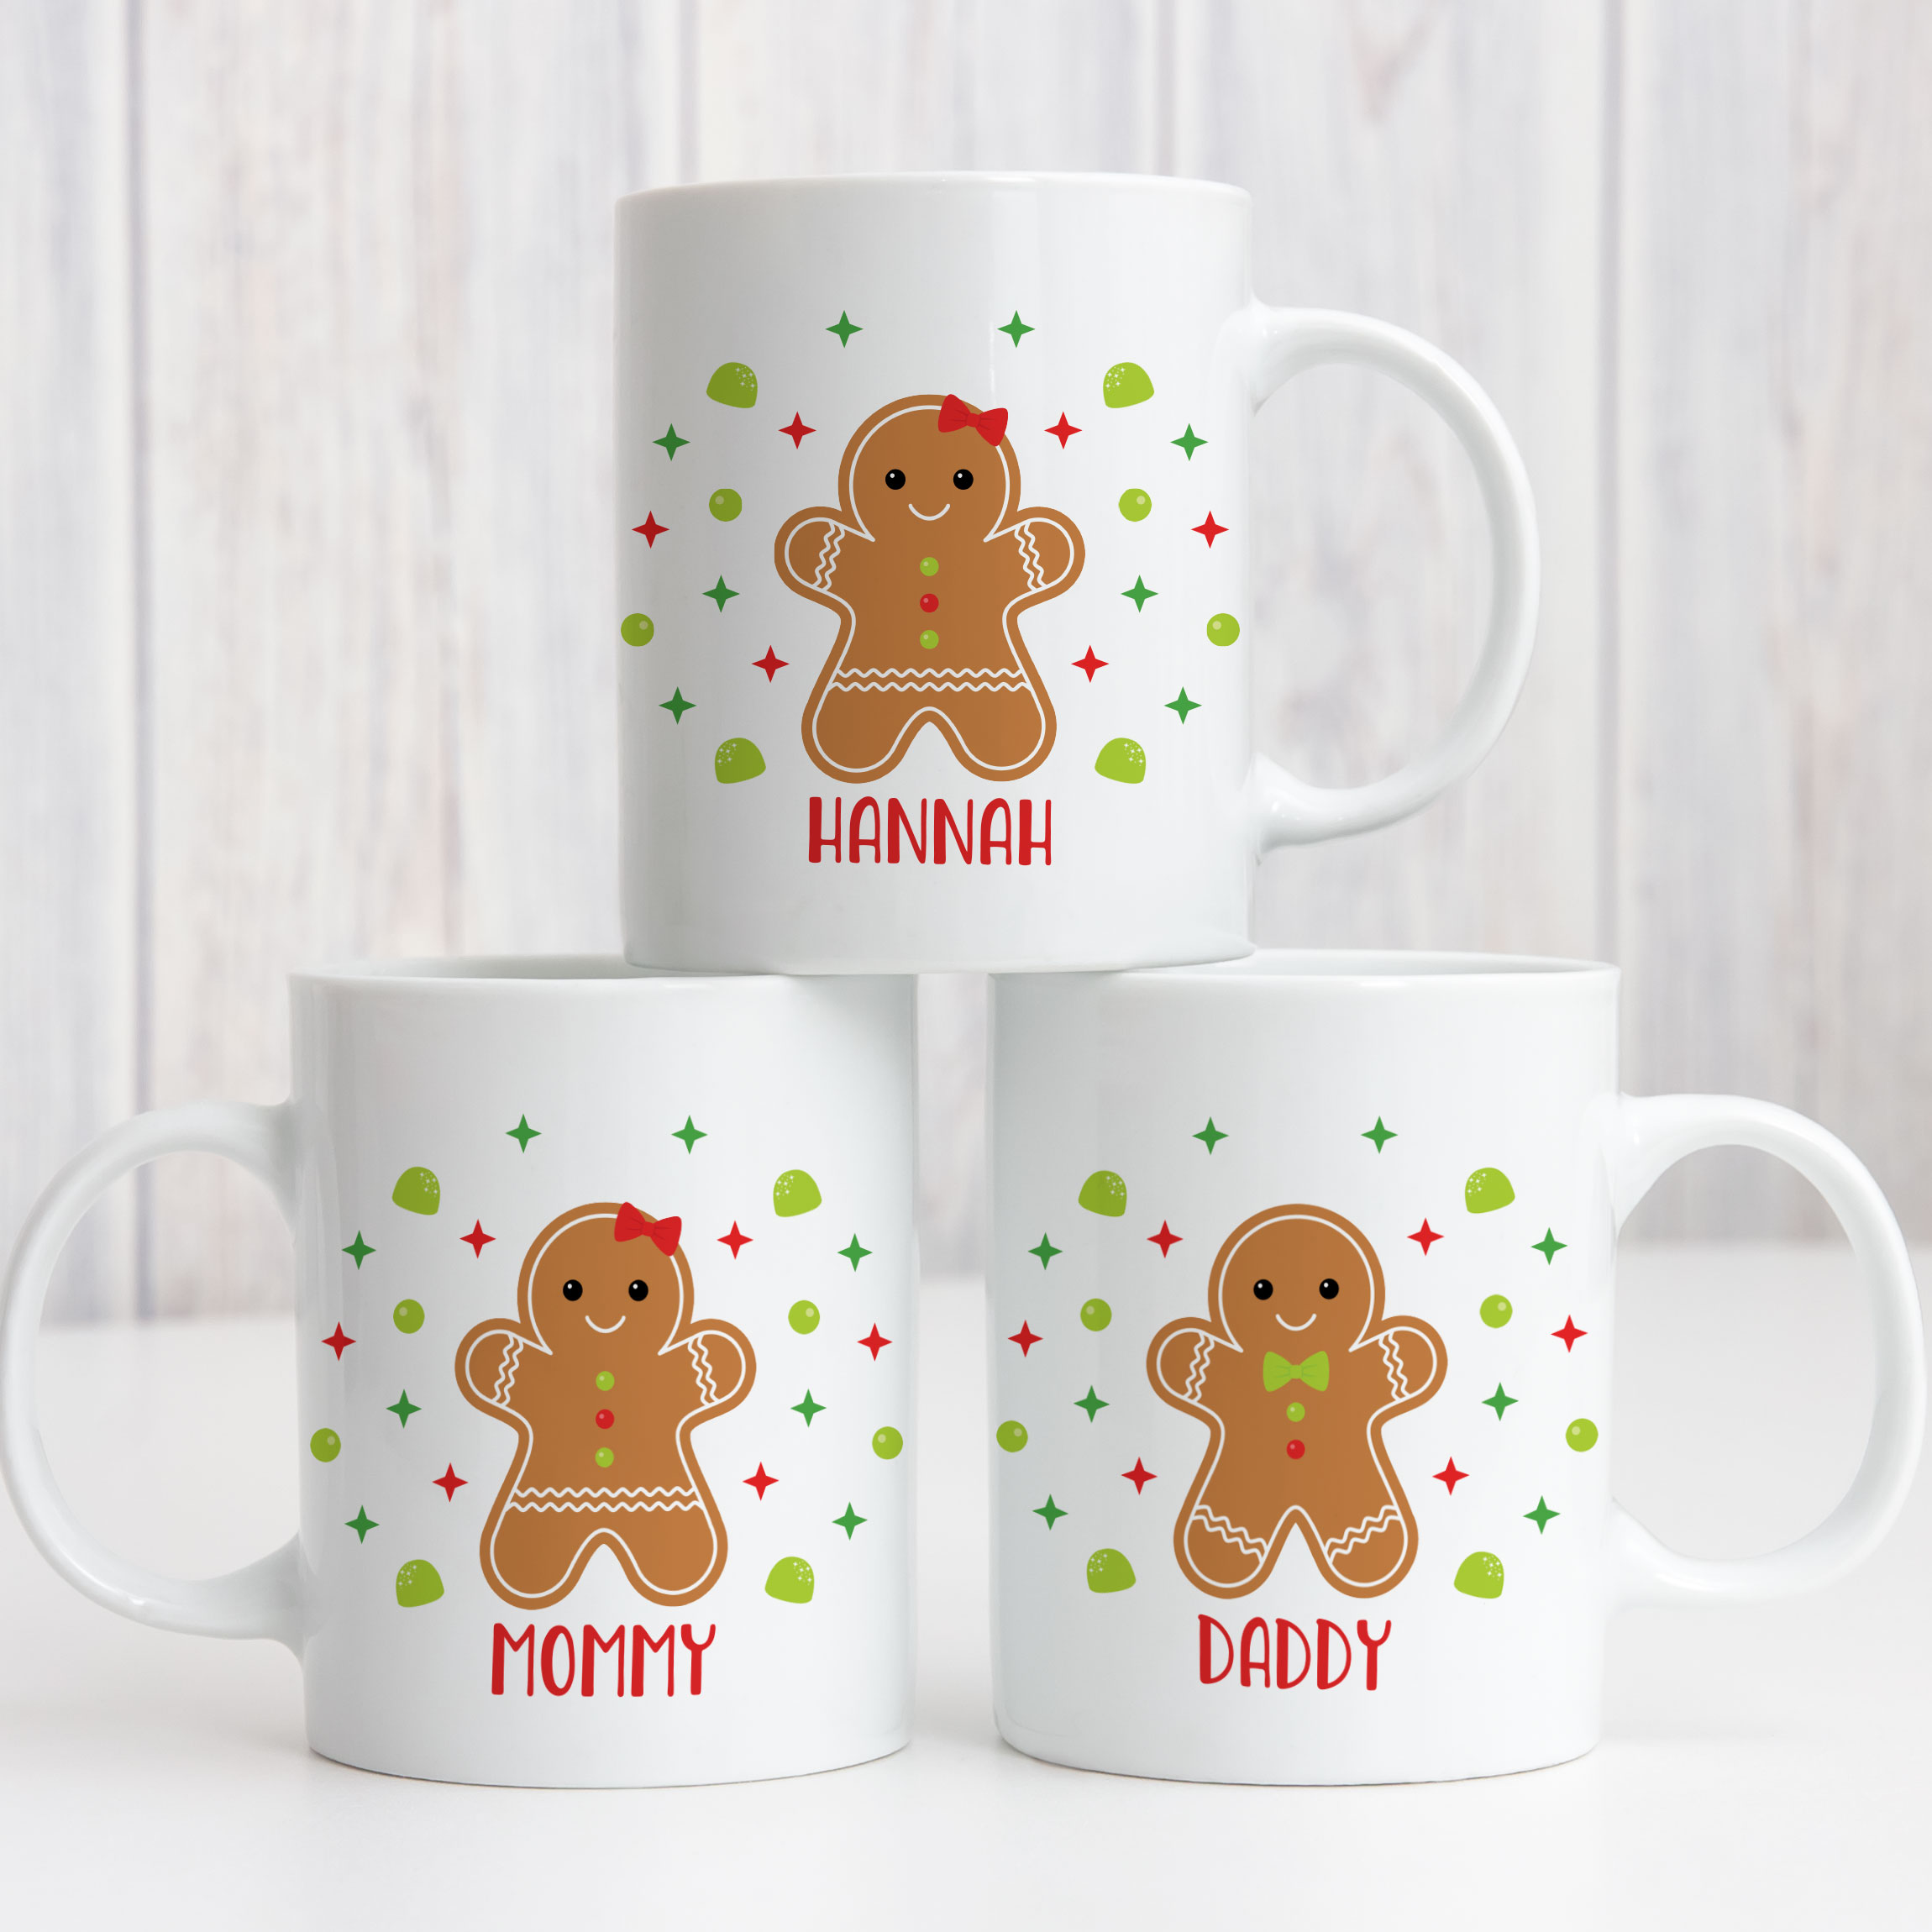 https://cdn11.bigcommerce.com/s-5grzuu6/images/stencil/original/products/5824/42985/Gingerbread-Personalized_Christmas_Mugs__33632.1632961260.jpg?c=2